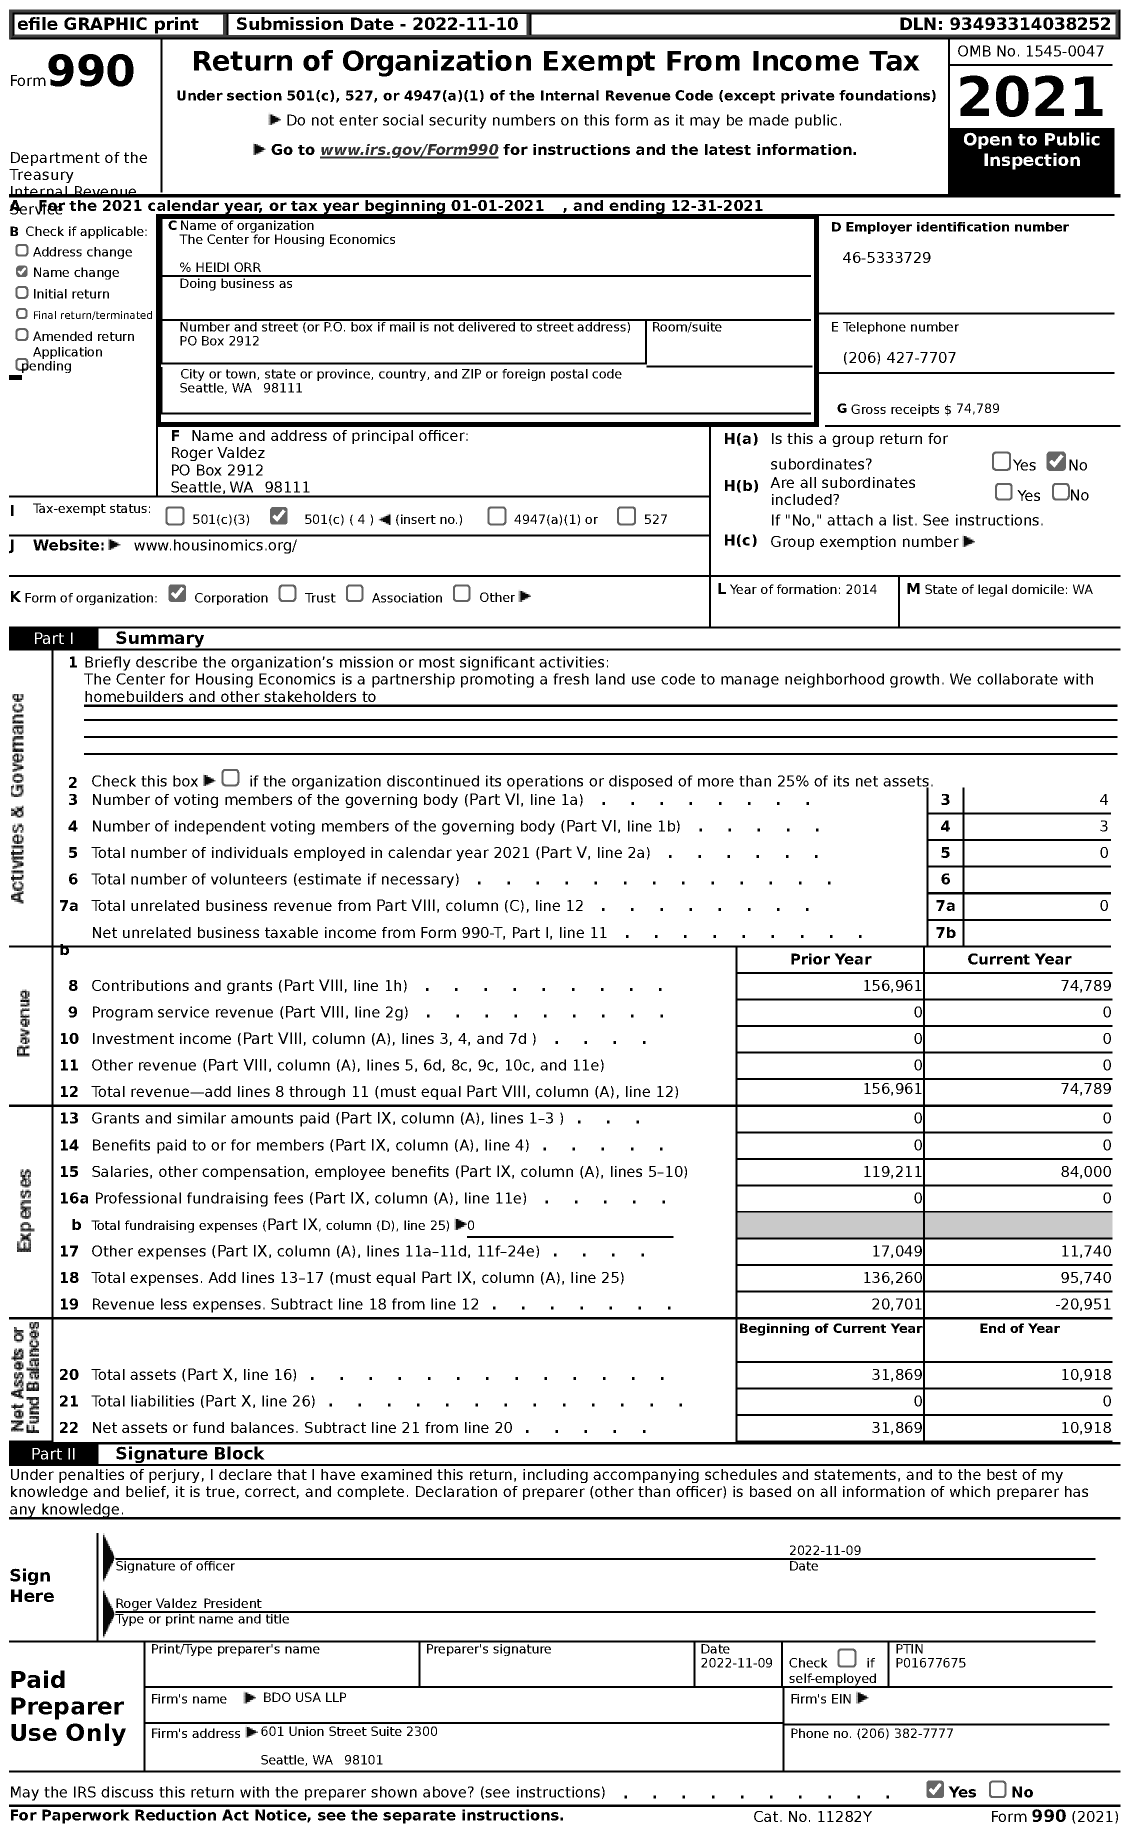 Image of first page of 2021 Form 990 for The Center for Housing Economics